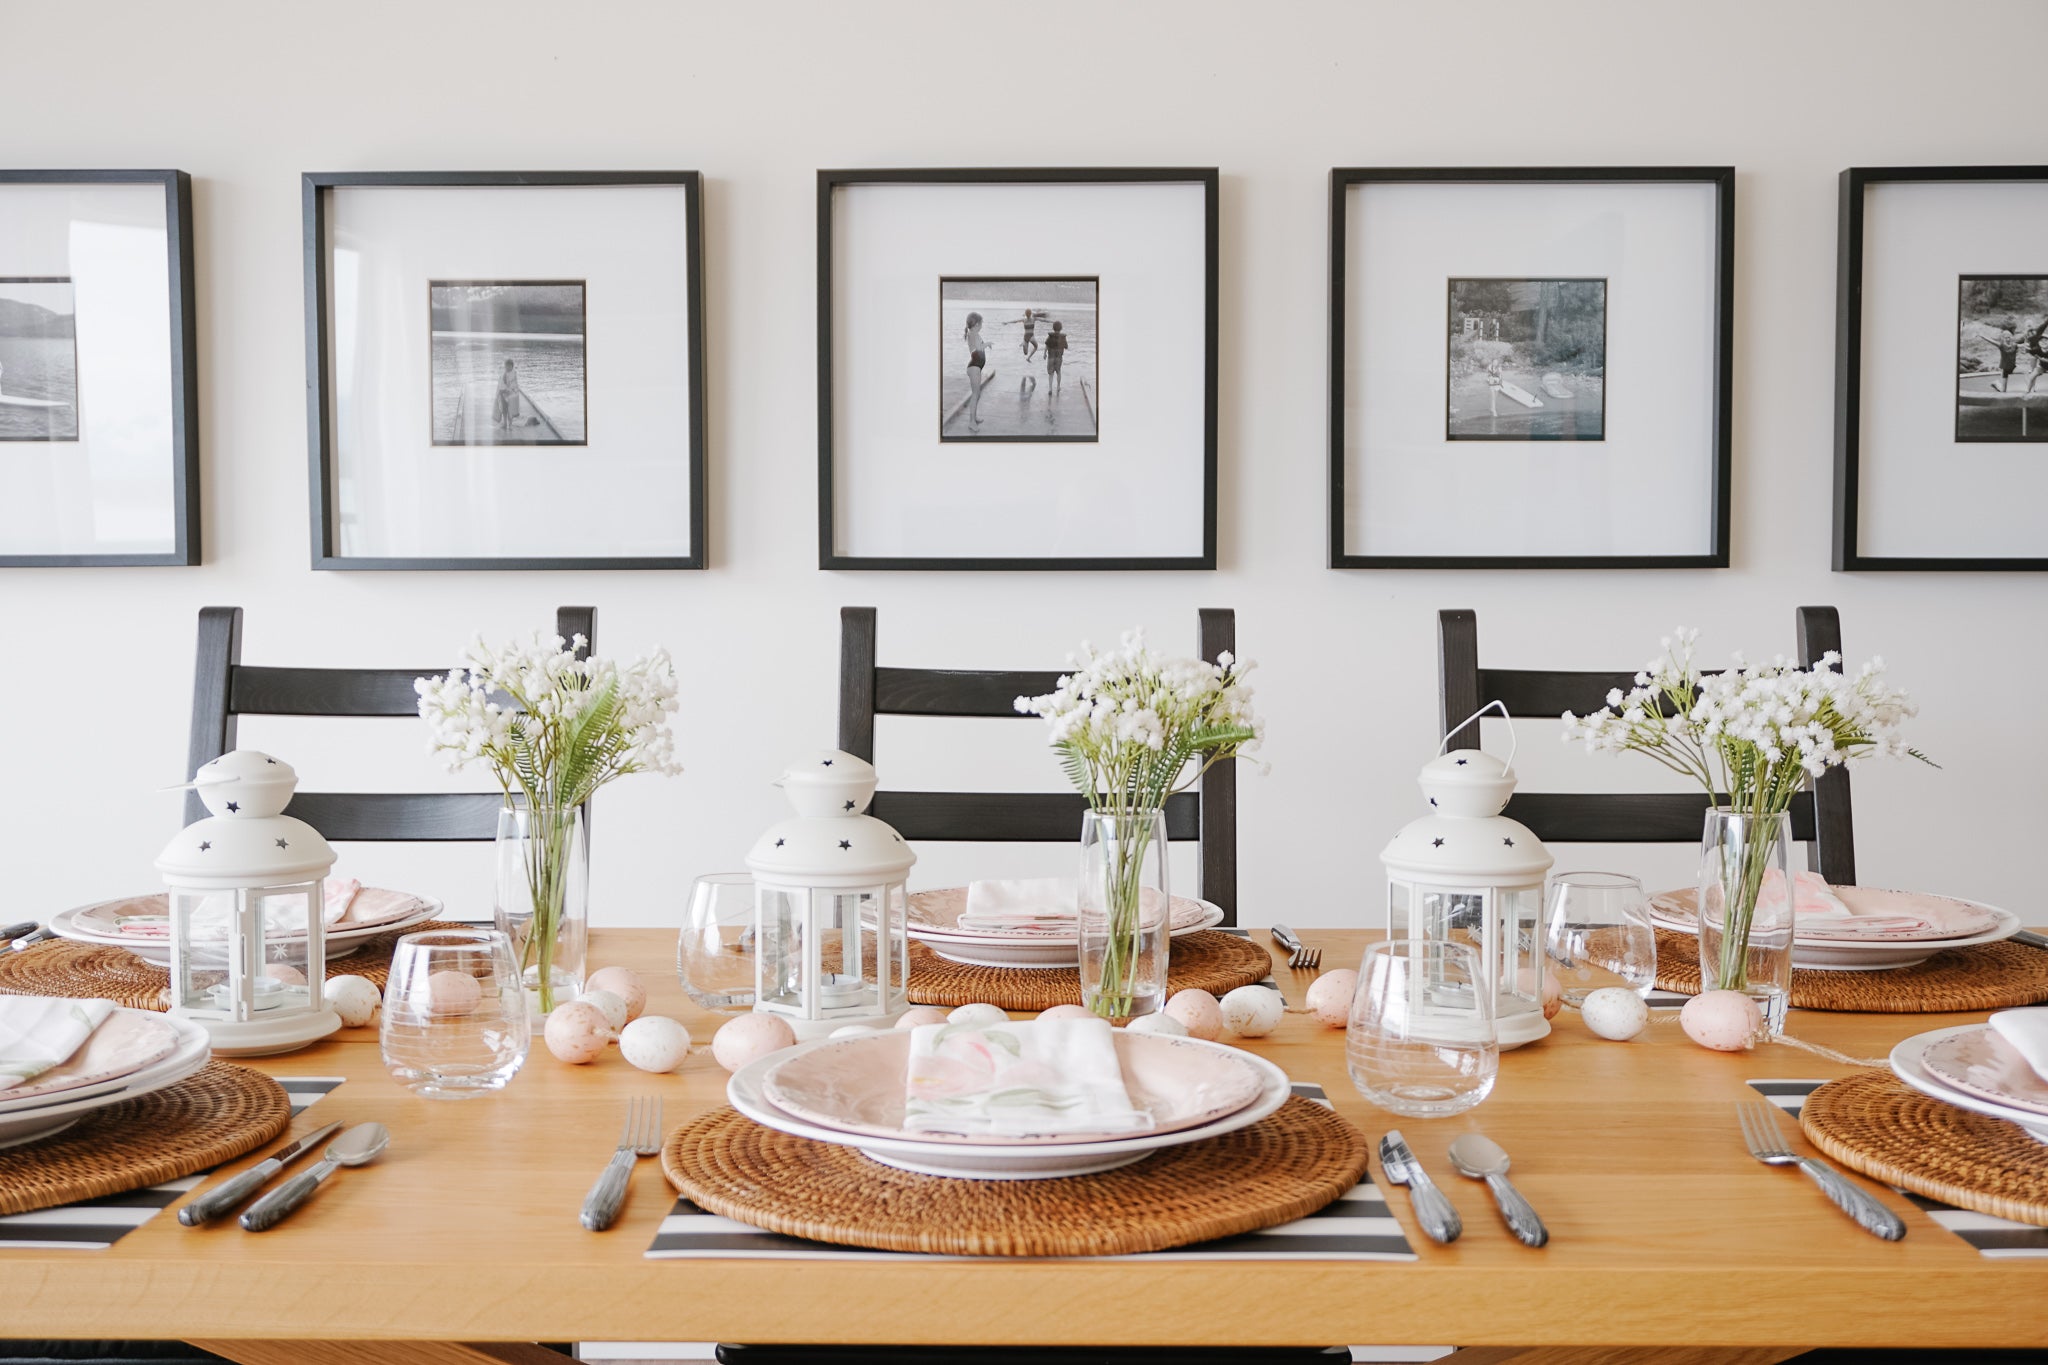 How to Decorate for an Easter Brunch